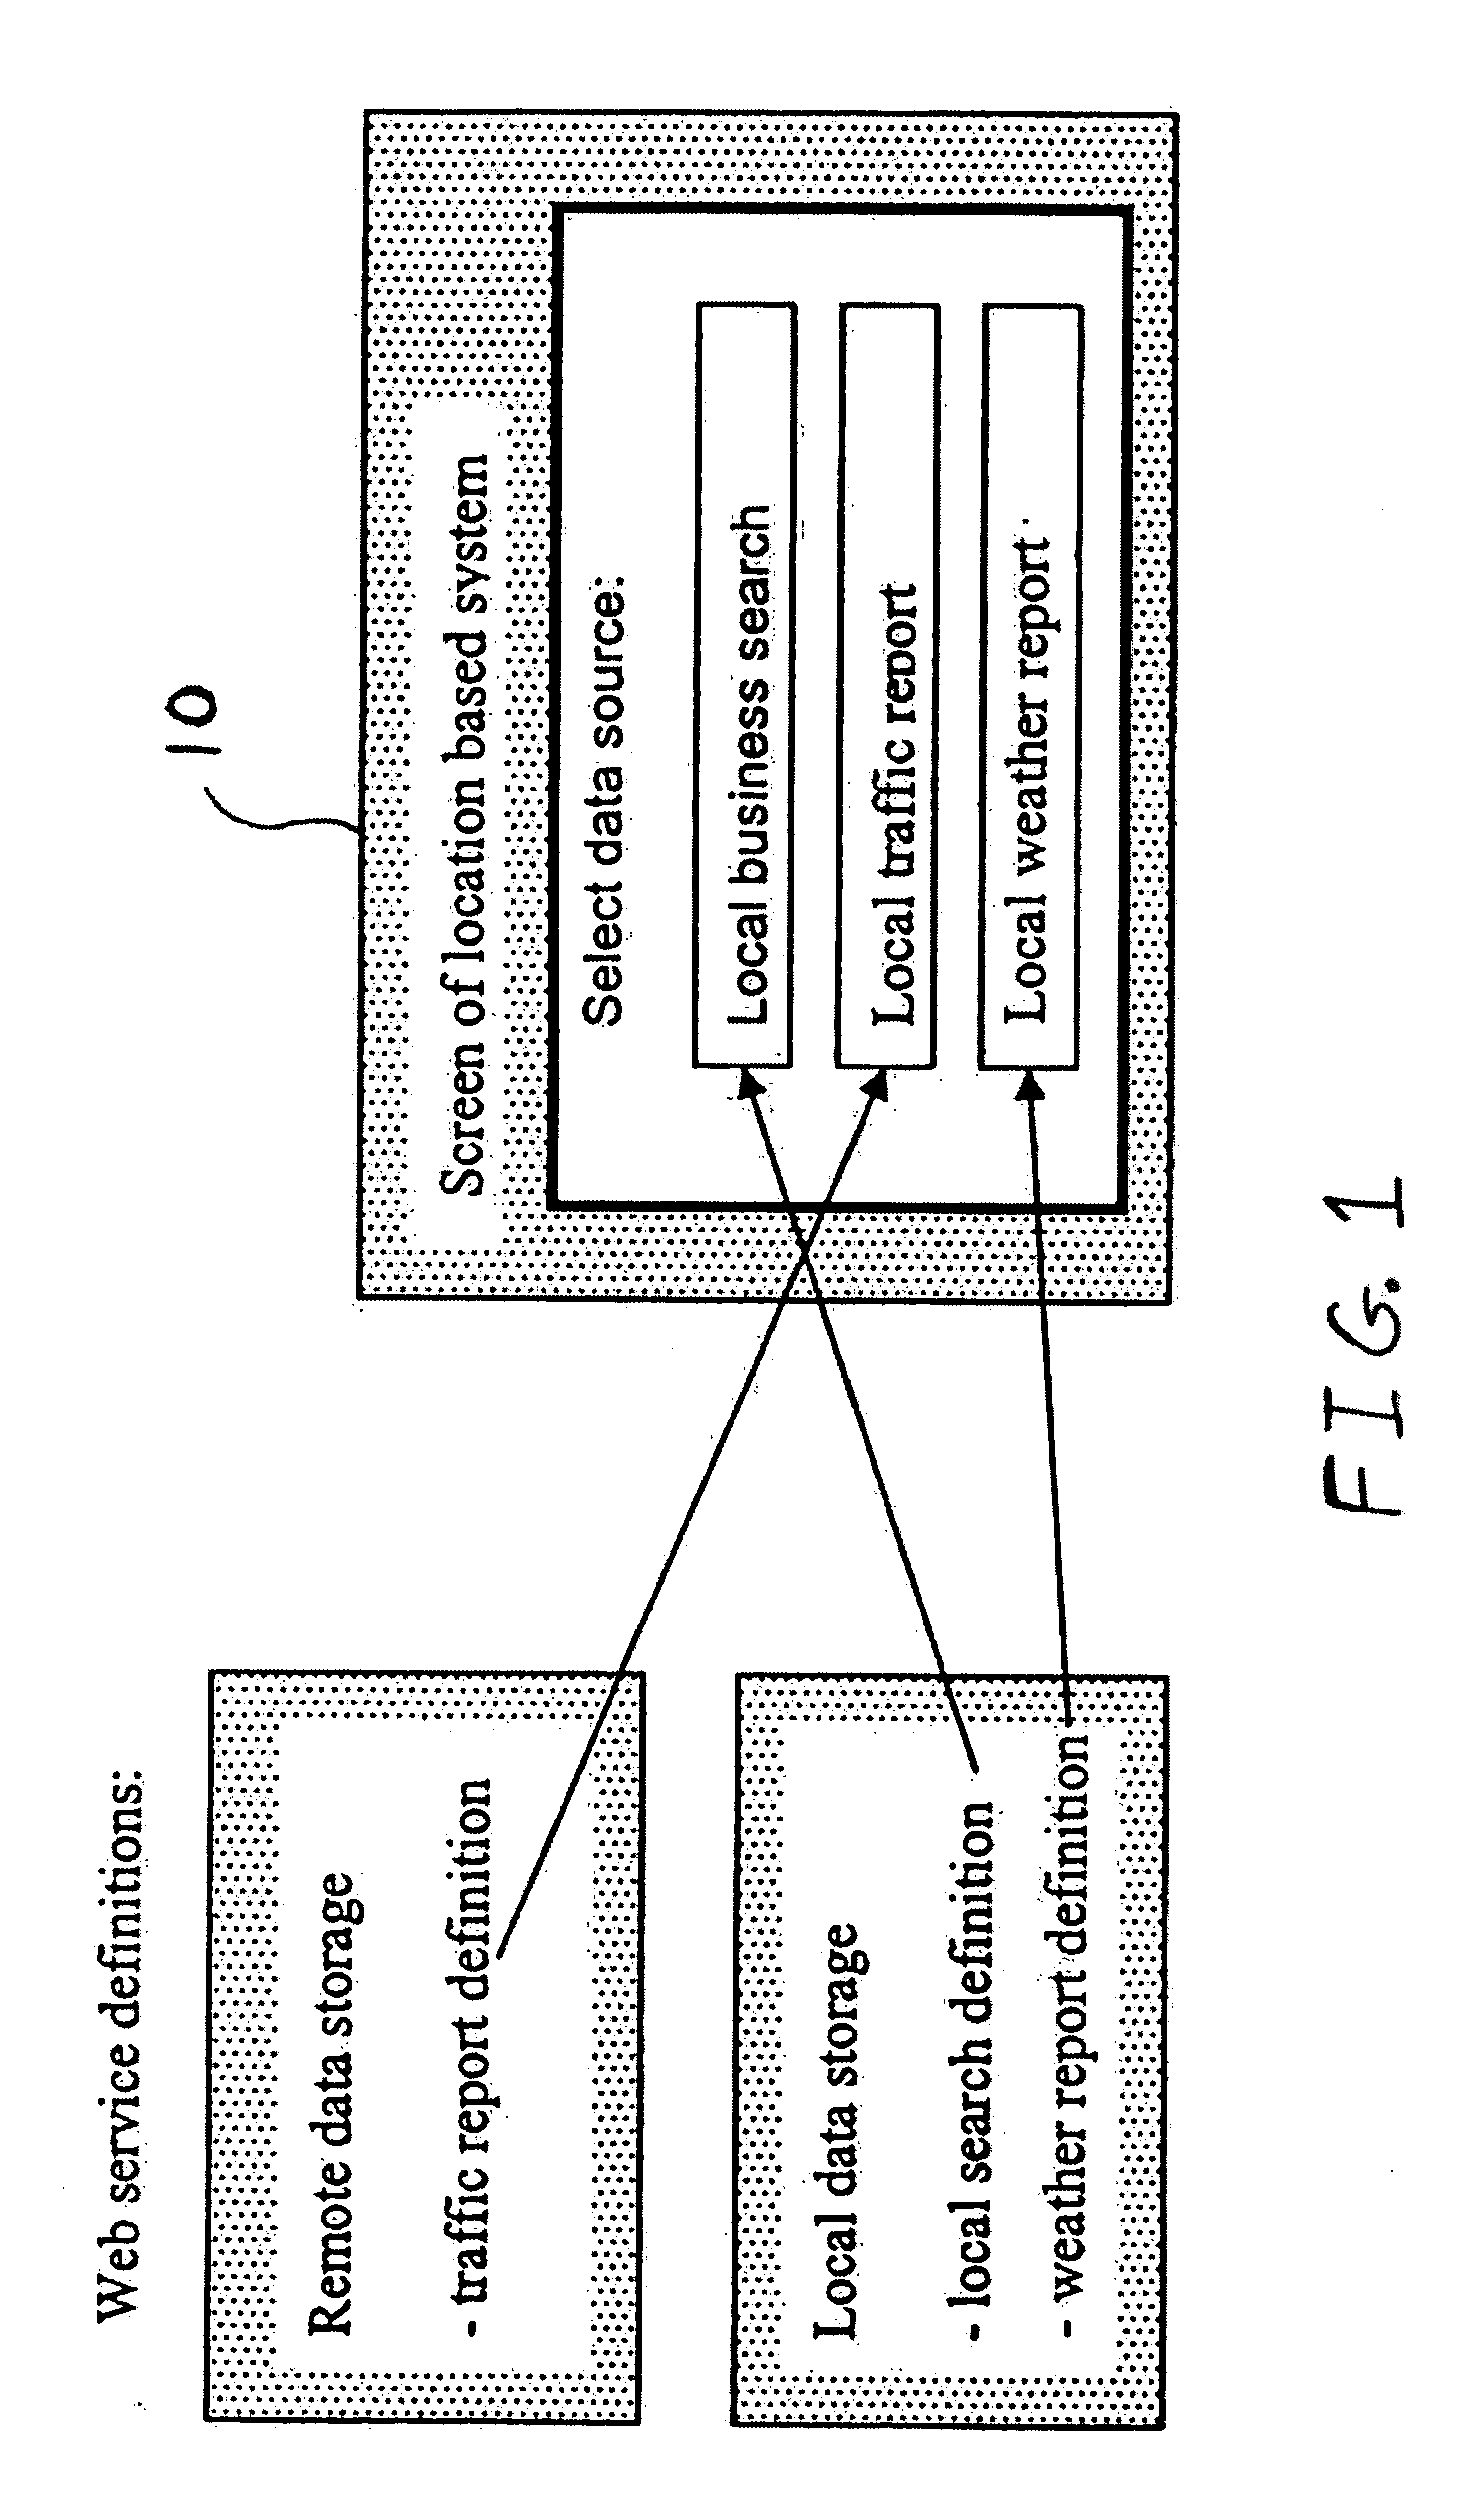 Apparatus and method for universal data access by location based systems